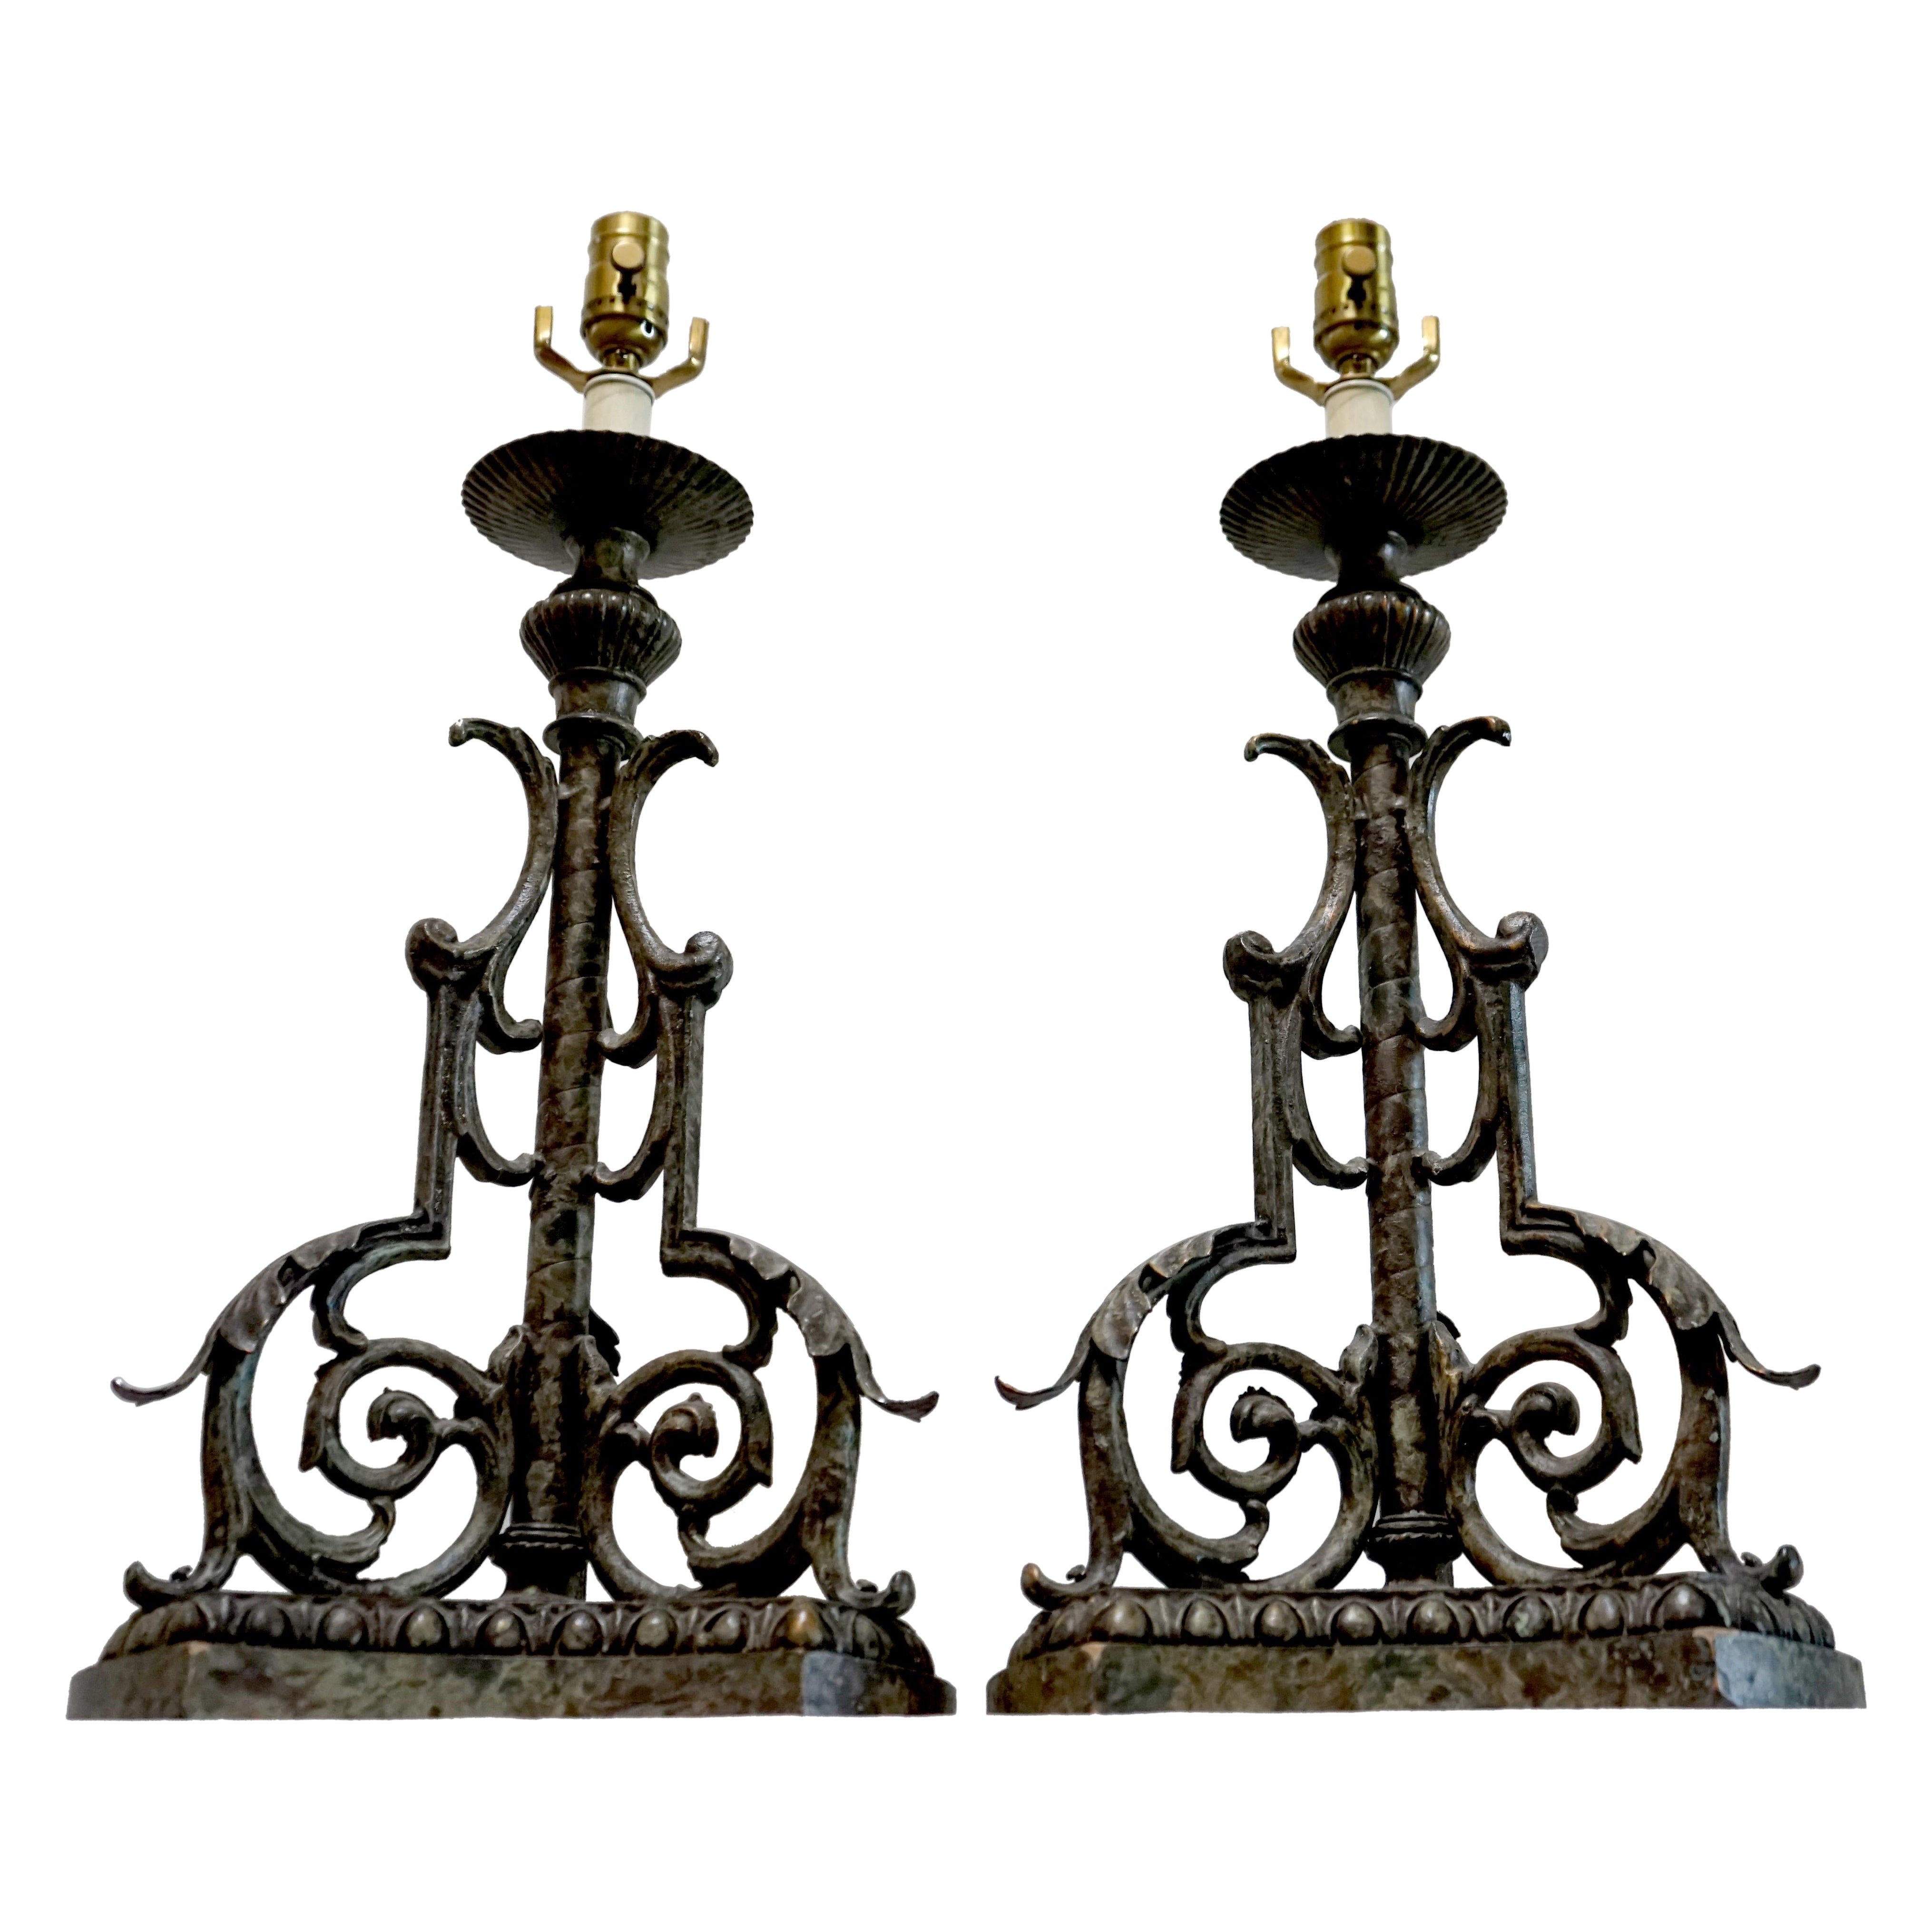 Pair of 19th Century European Pricket Conversion Gothic Table Lamps For Sale